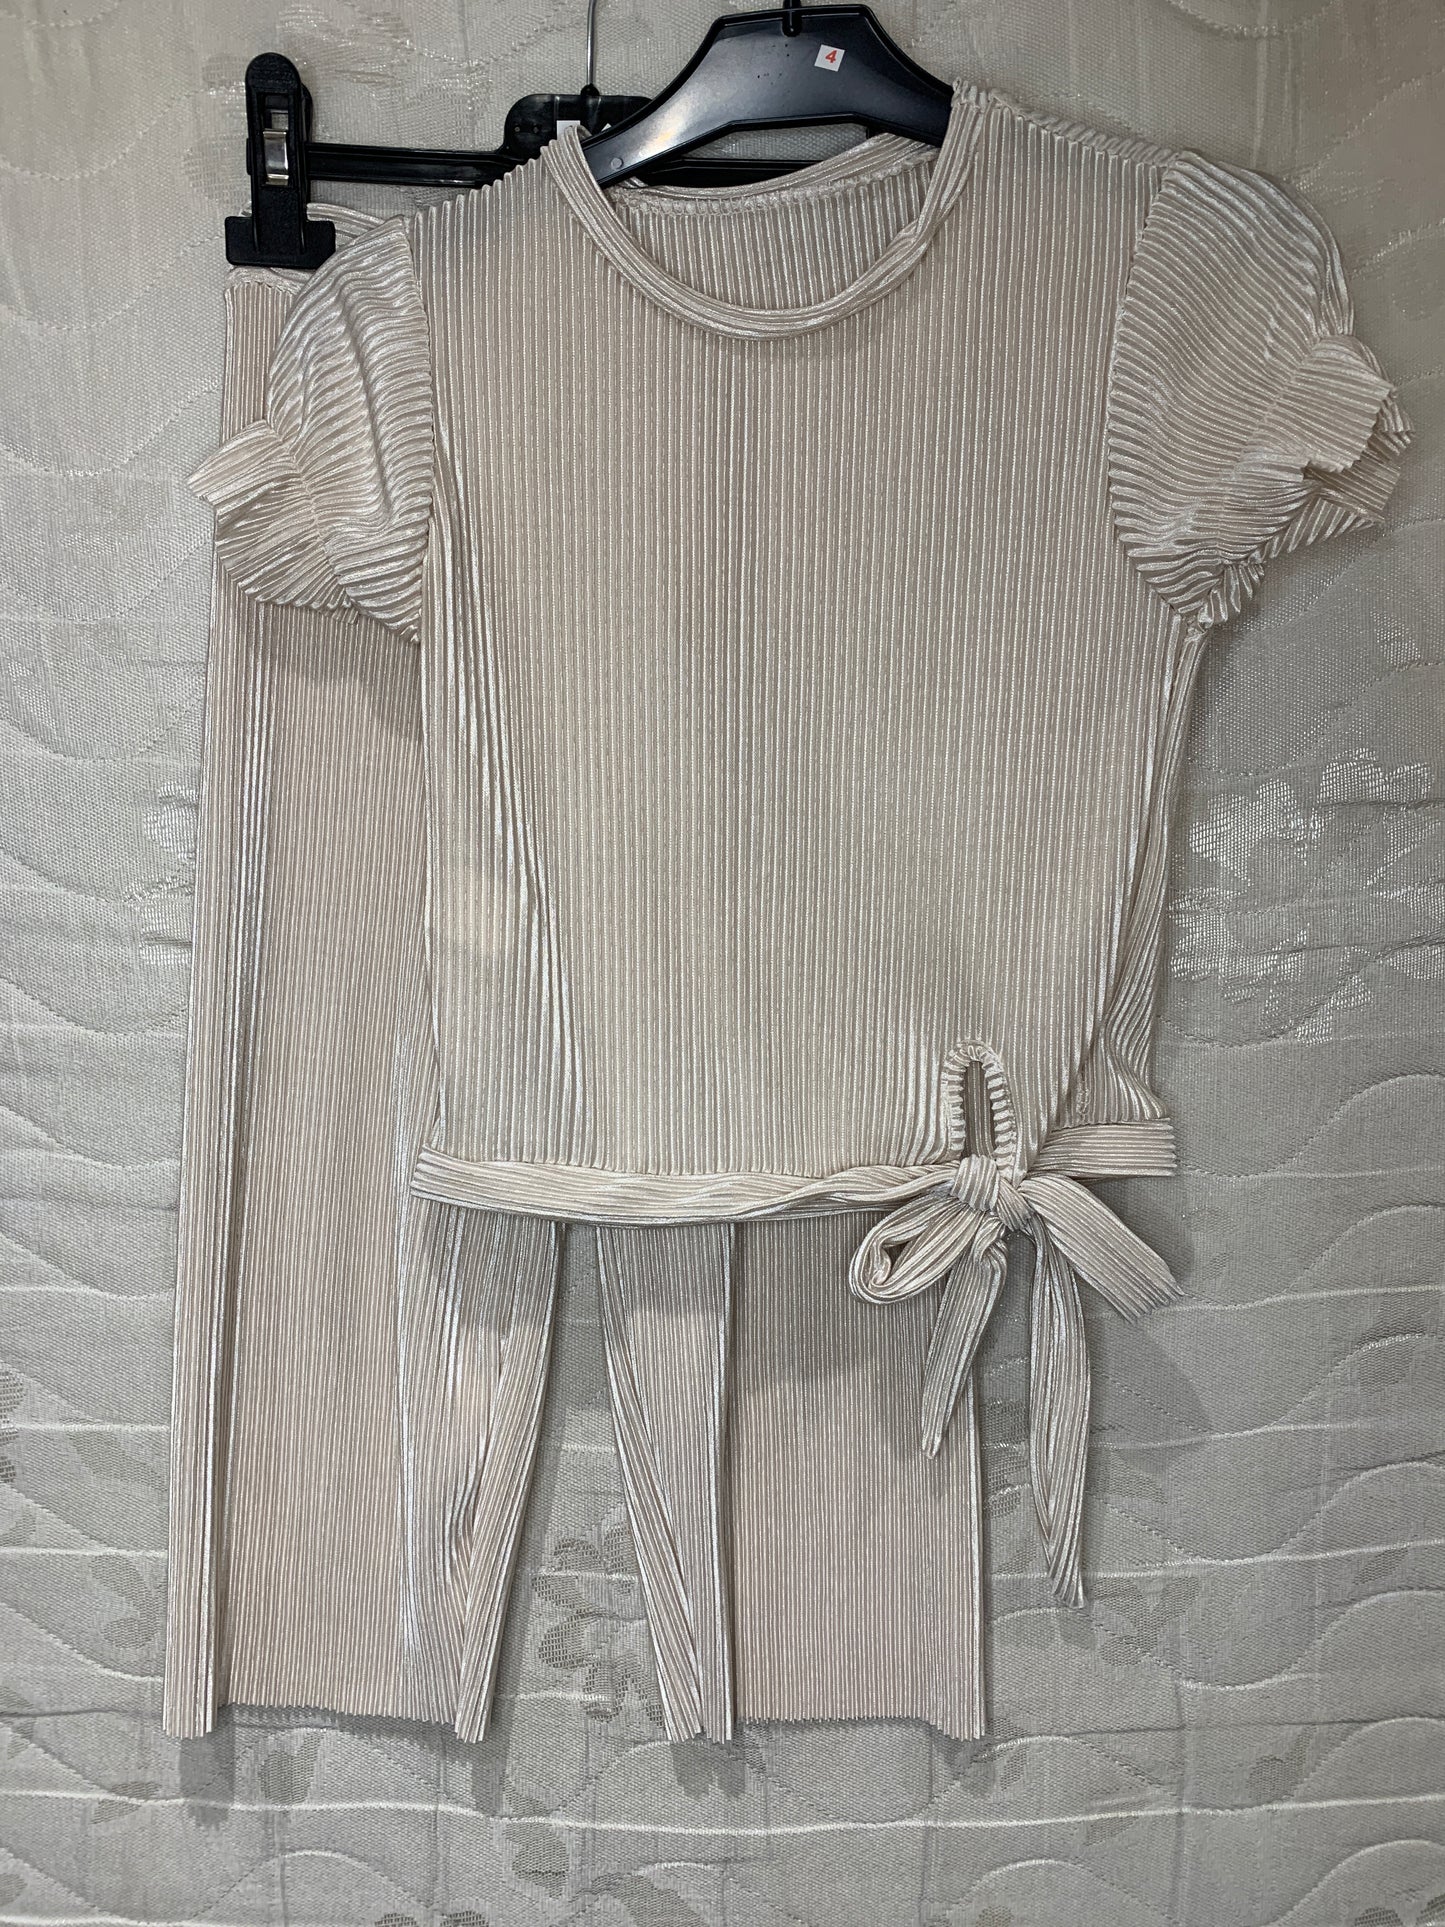 Girls summer coord sets with bow tie